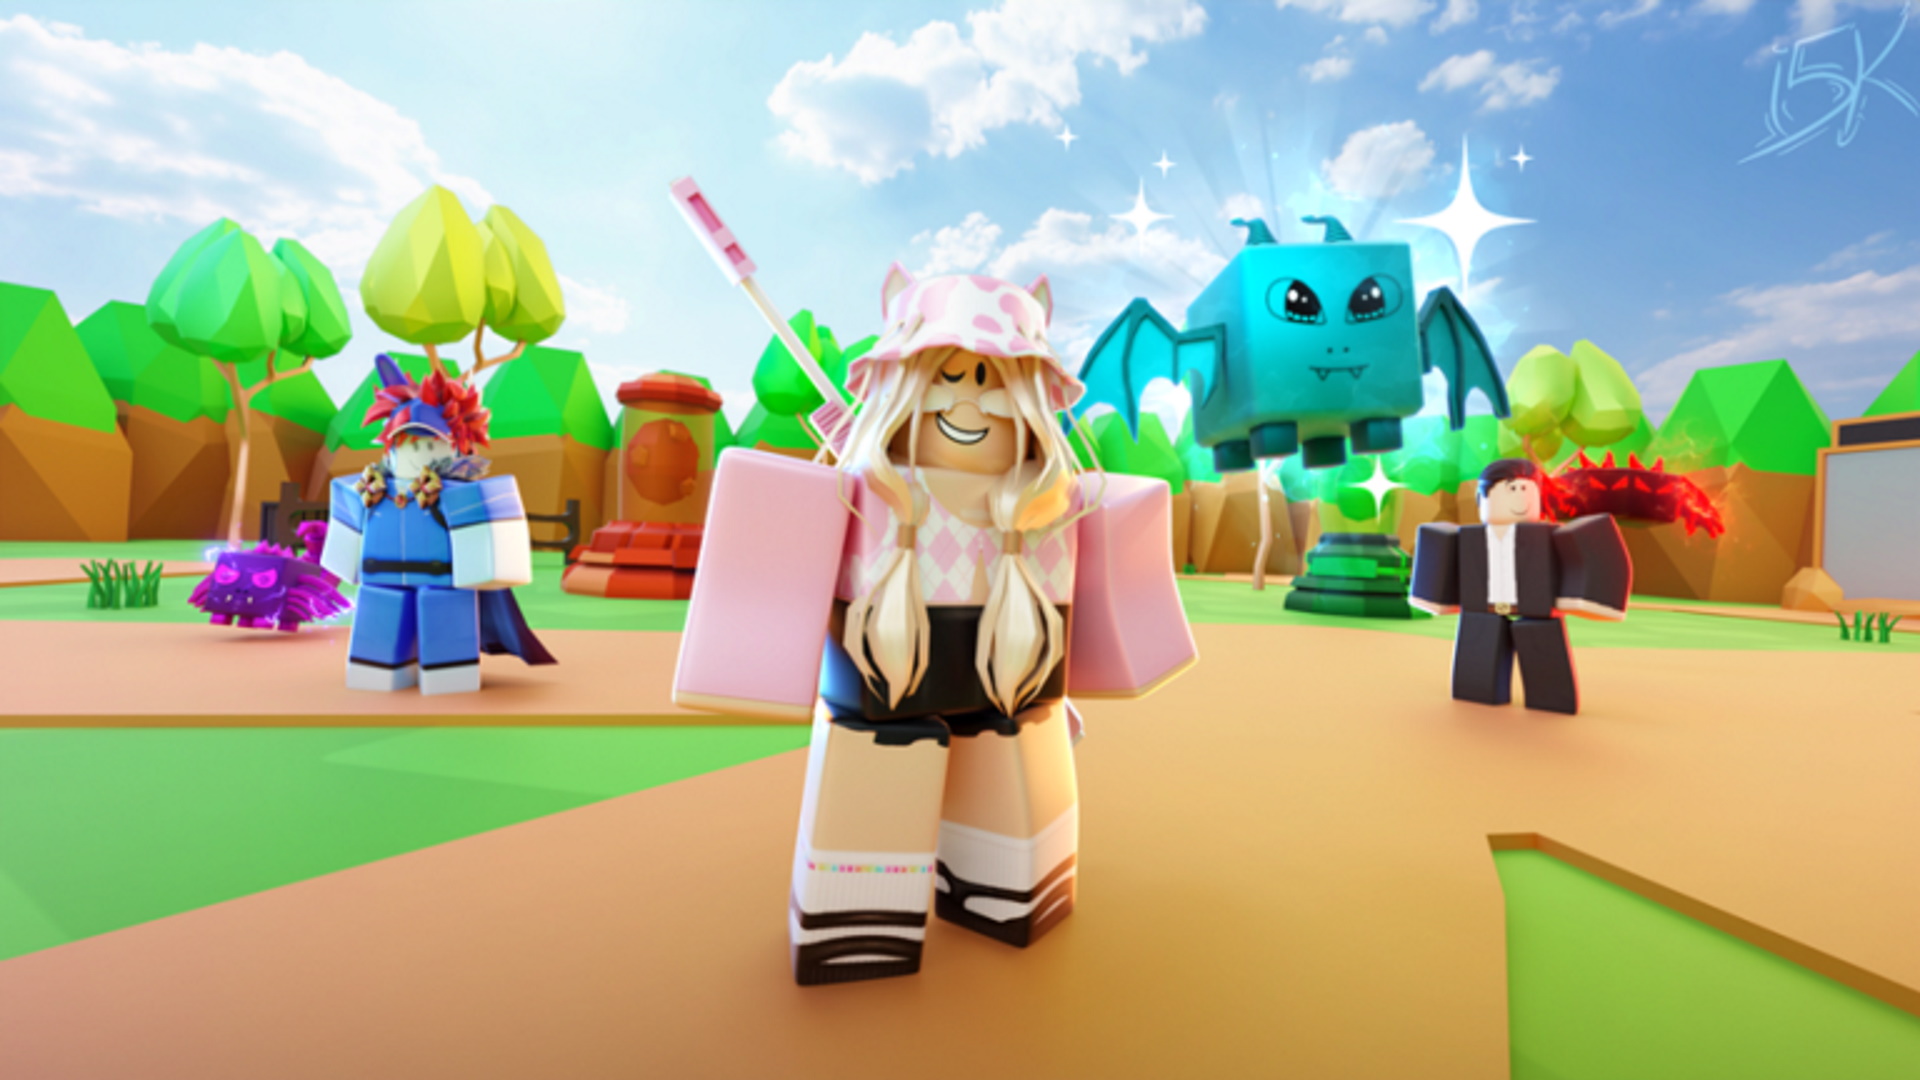 Roblox chat filters will be reduced for users 13 and older | PCGamesN